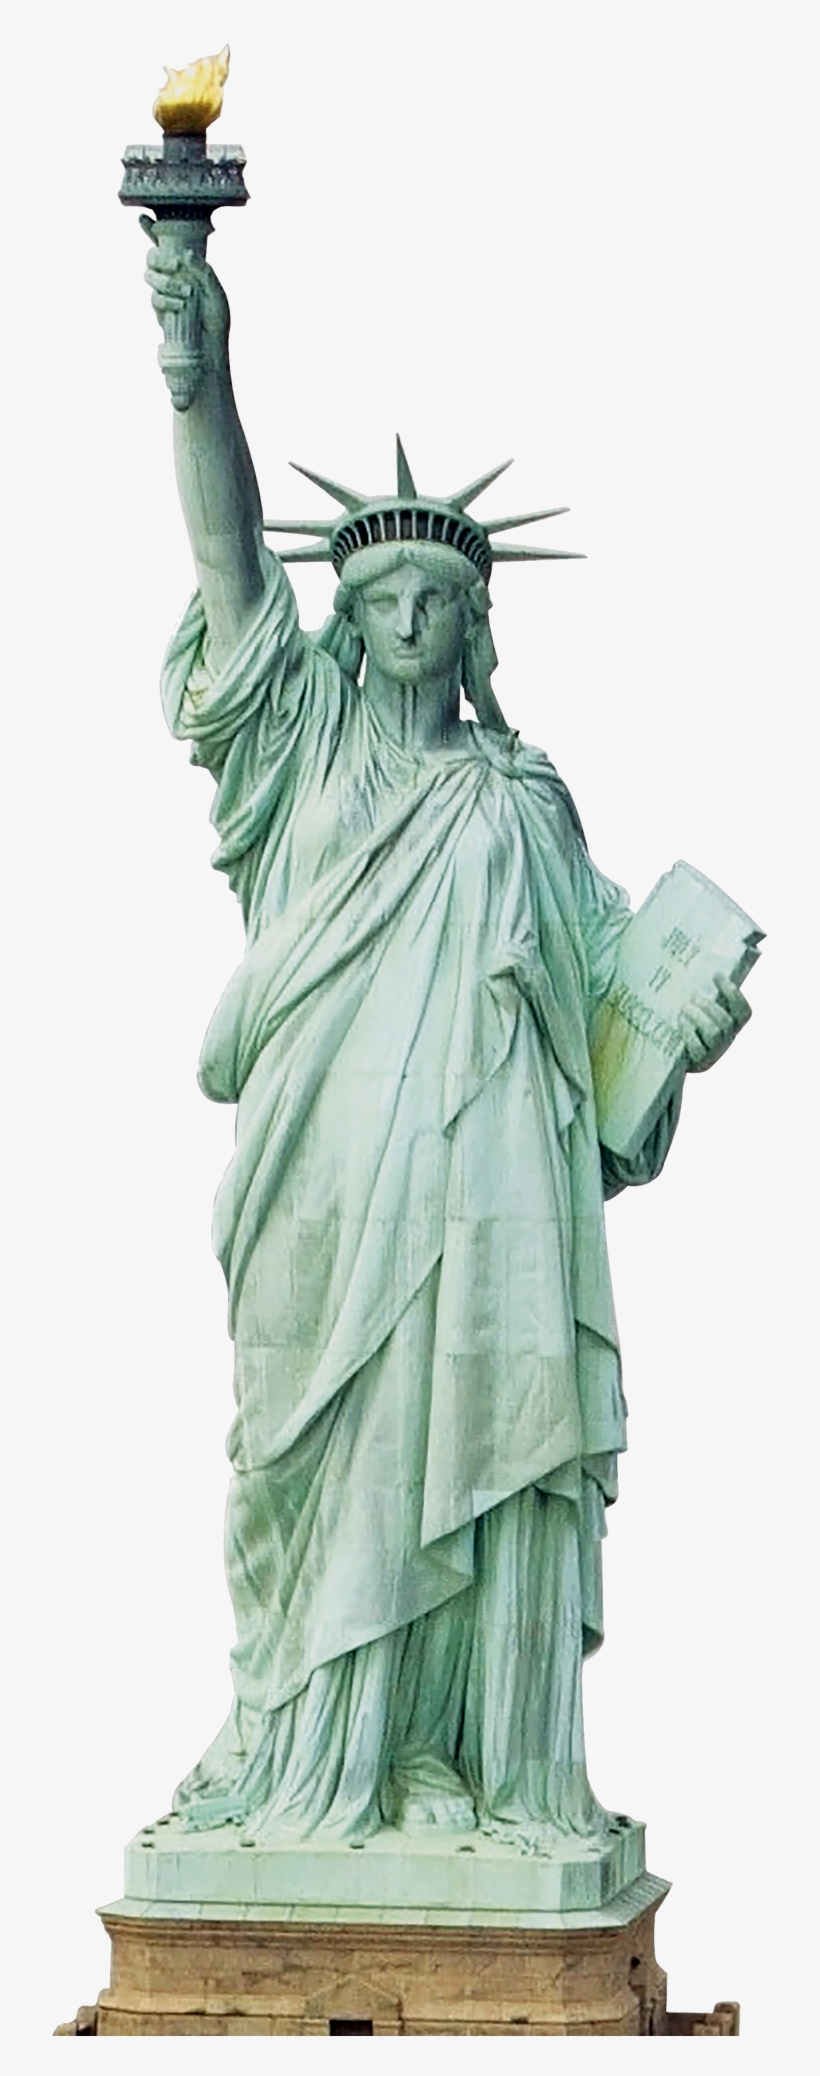 Statue Of Liberty Png Image - Statue Of Liberty, transparent png #88071